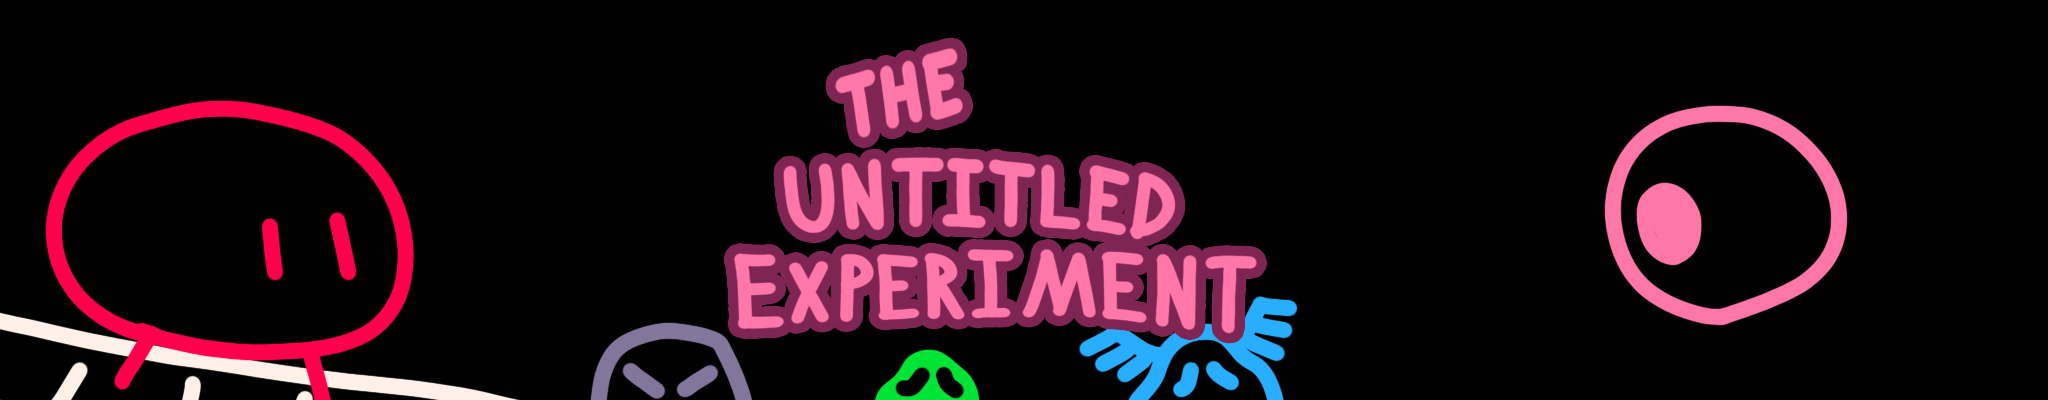 The Untitled Experiment